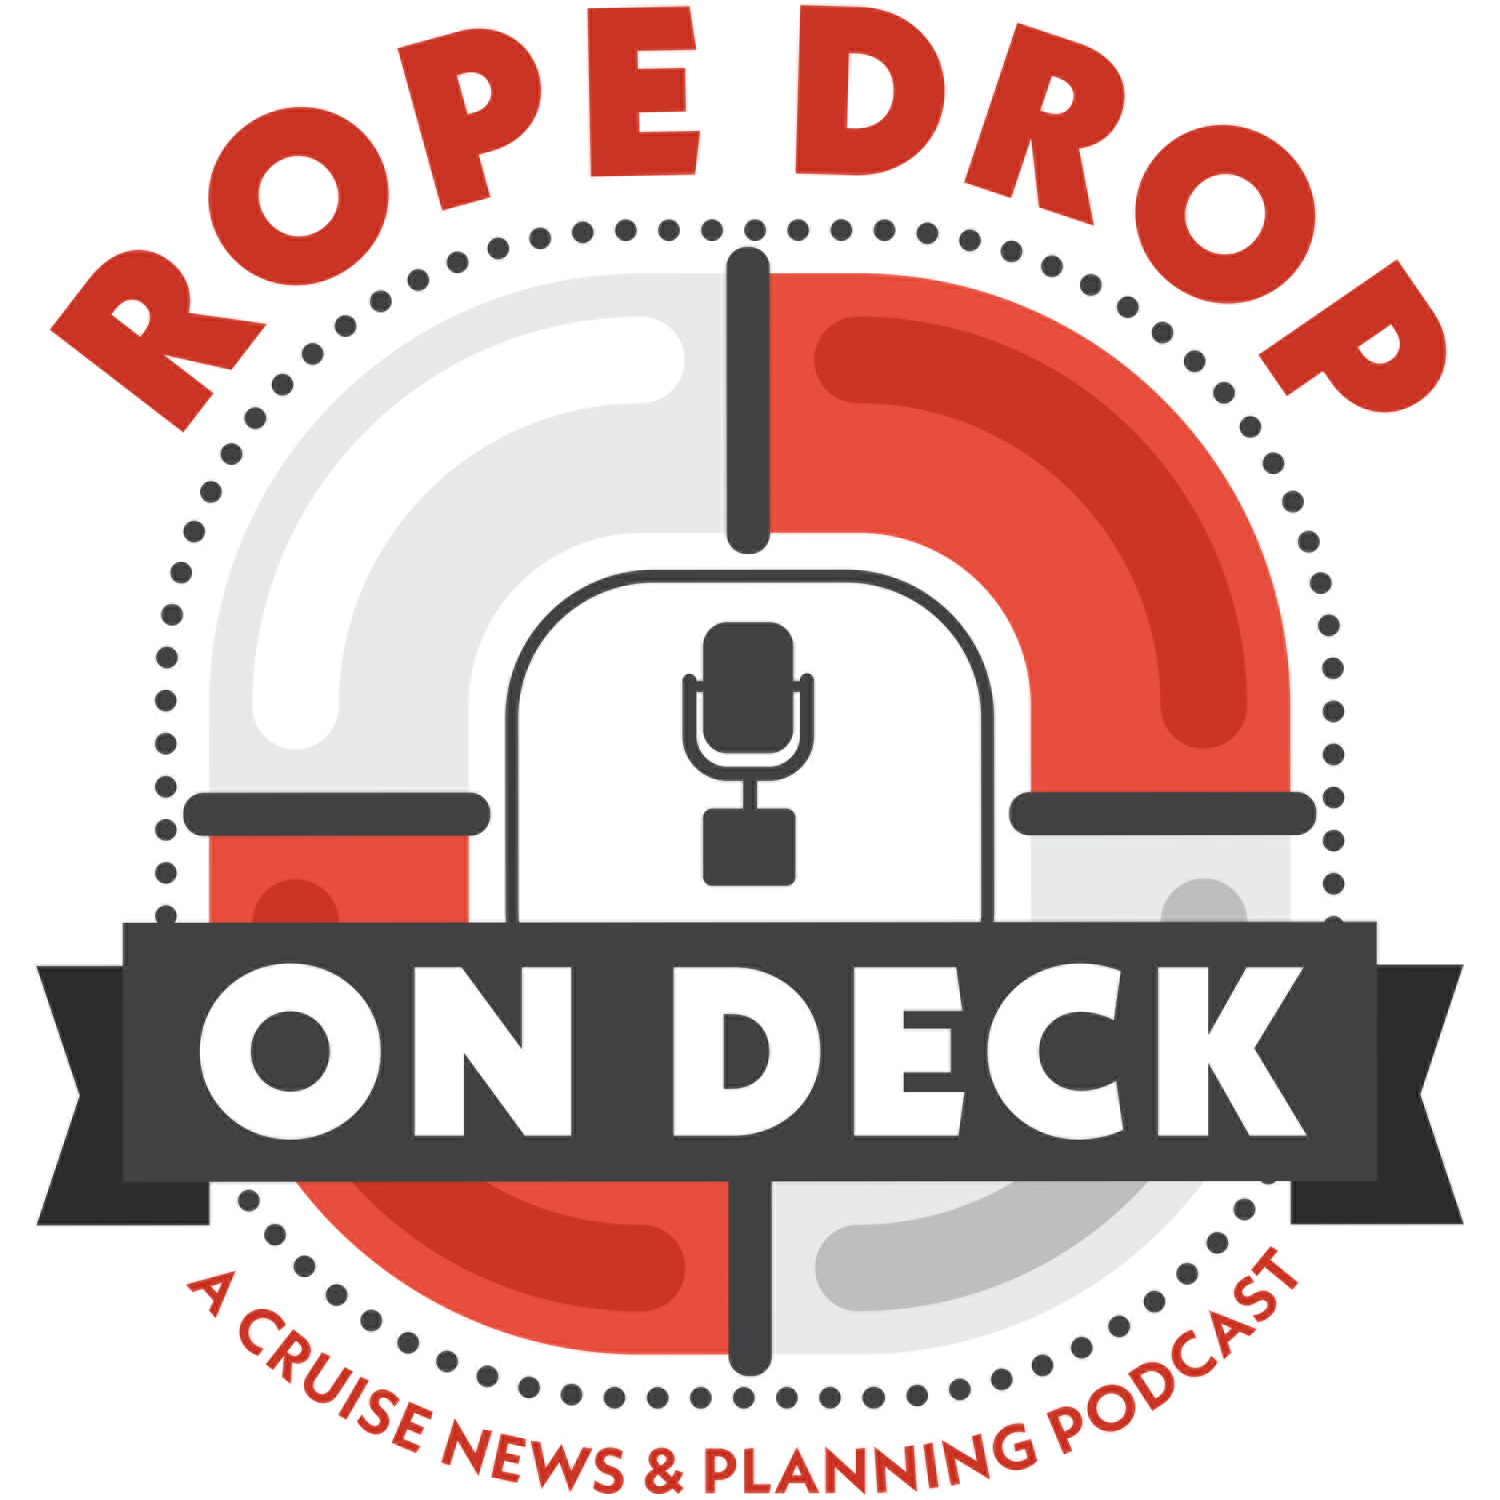 Rope Drop: On Deck - A Cruise News and Planning Podcast